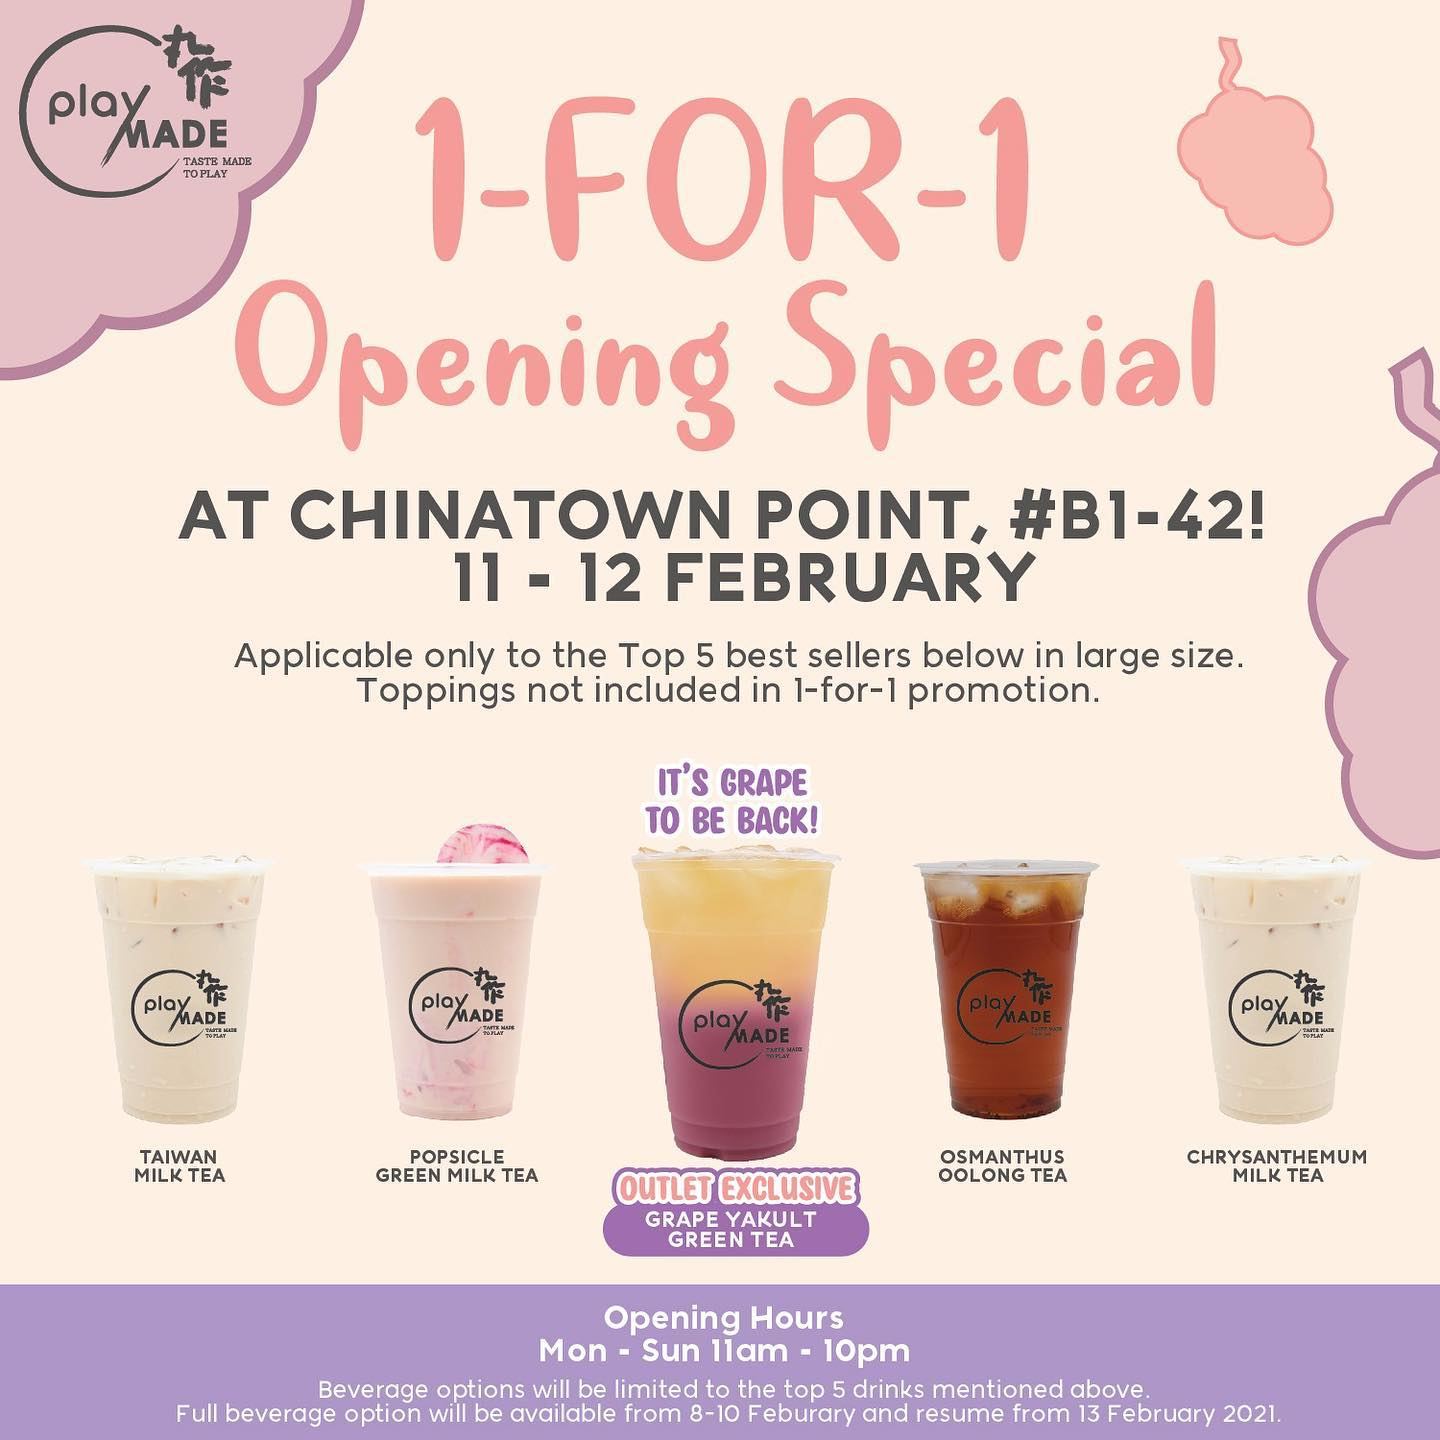 playmade chinatown opening special